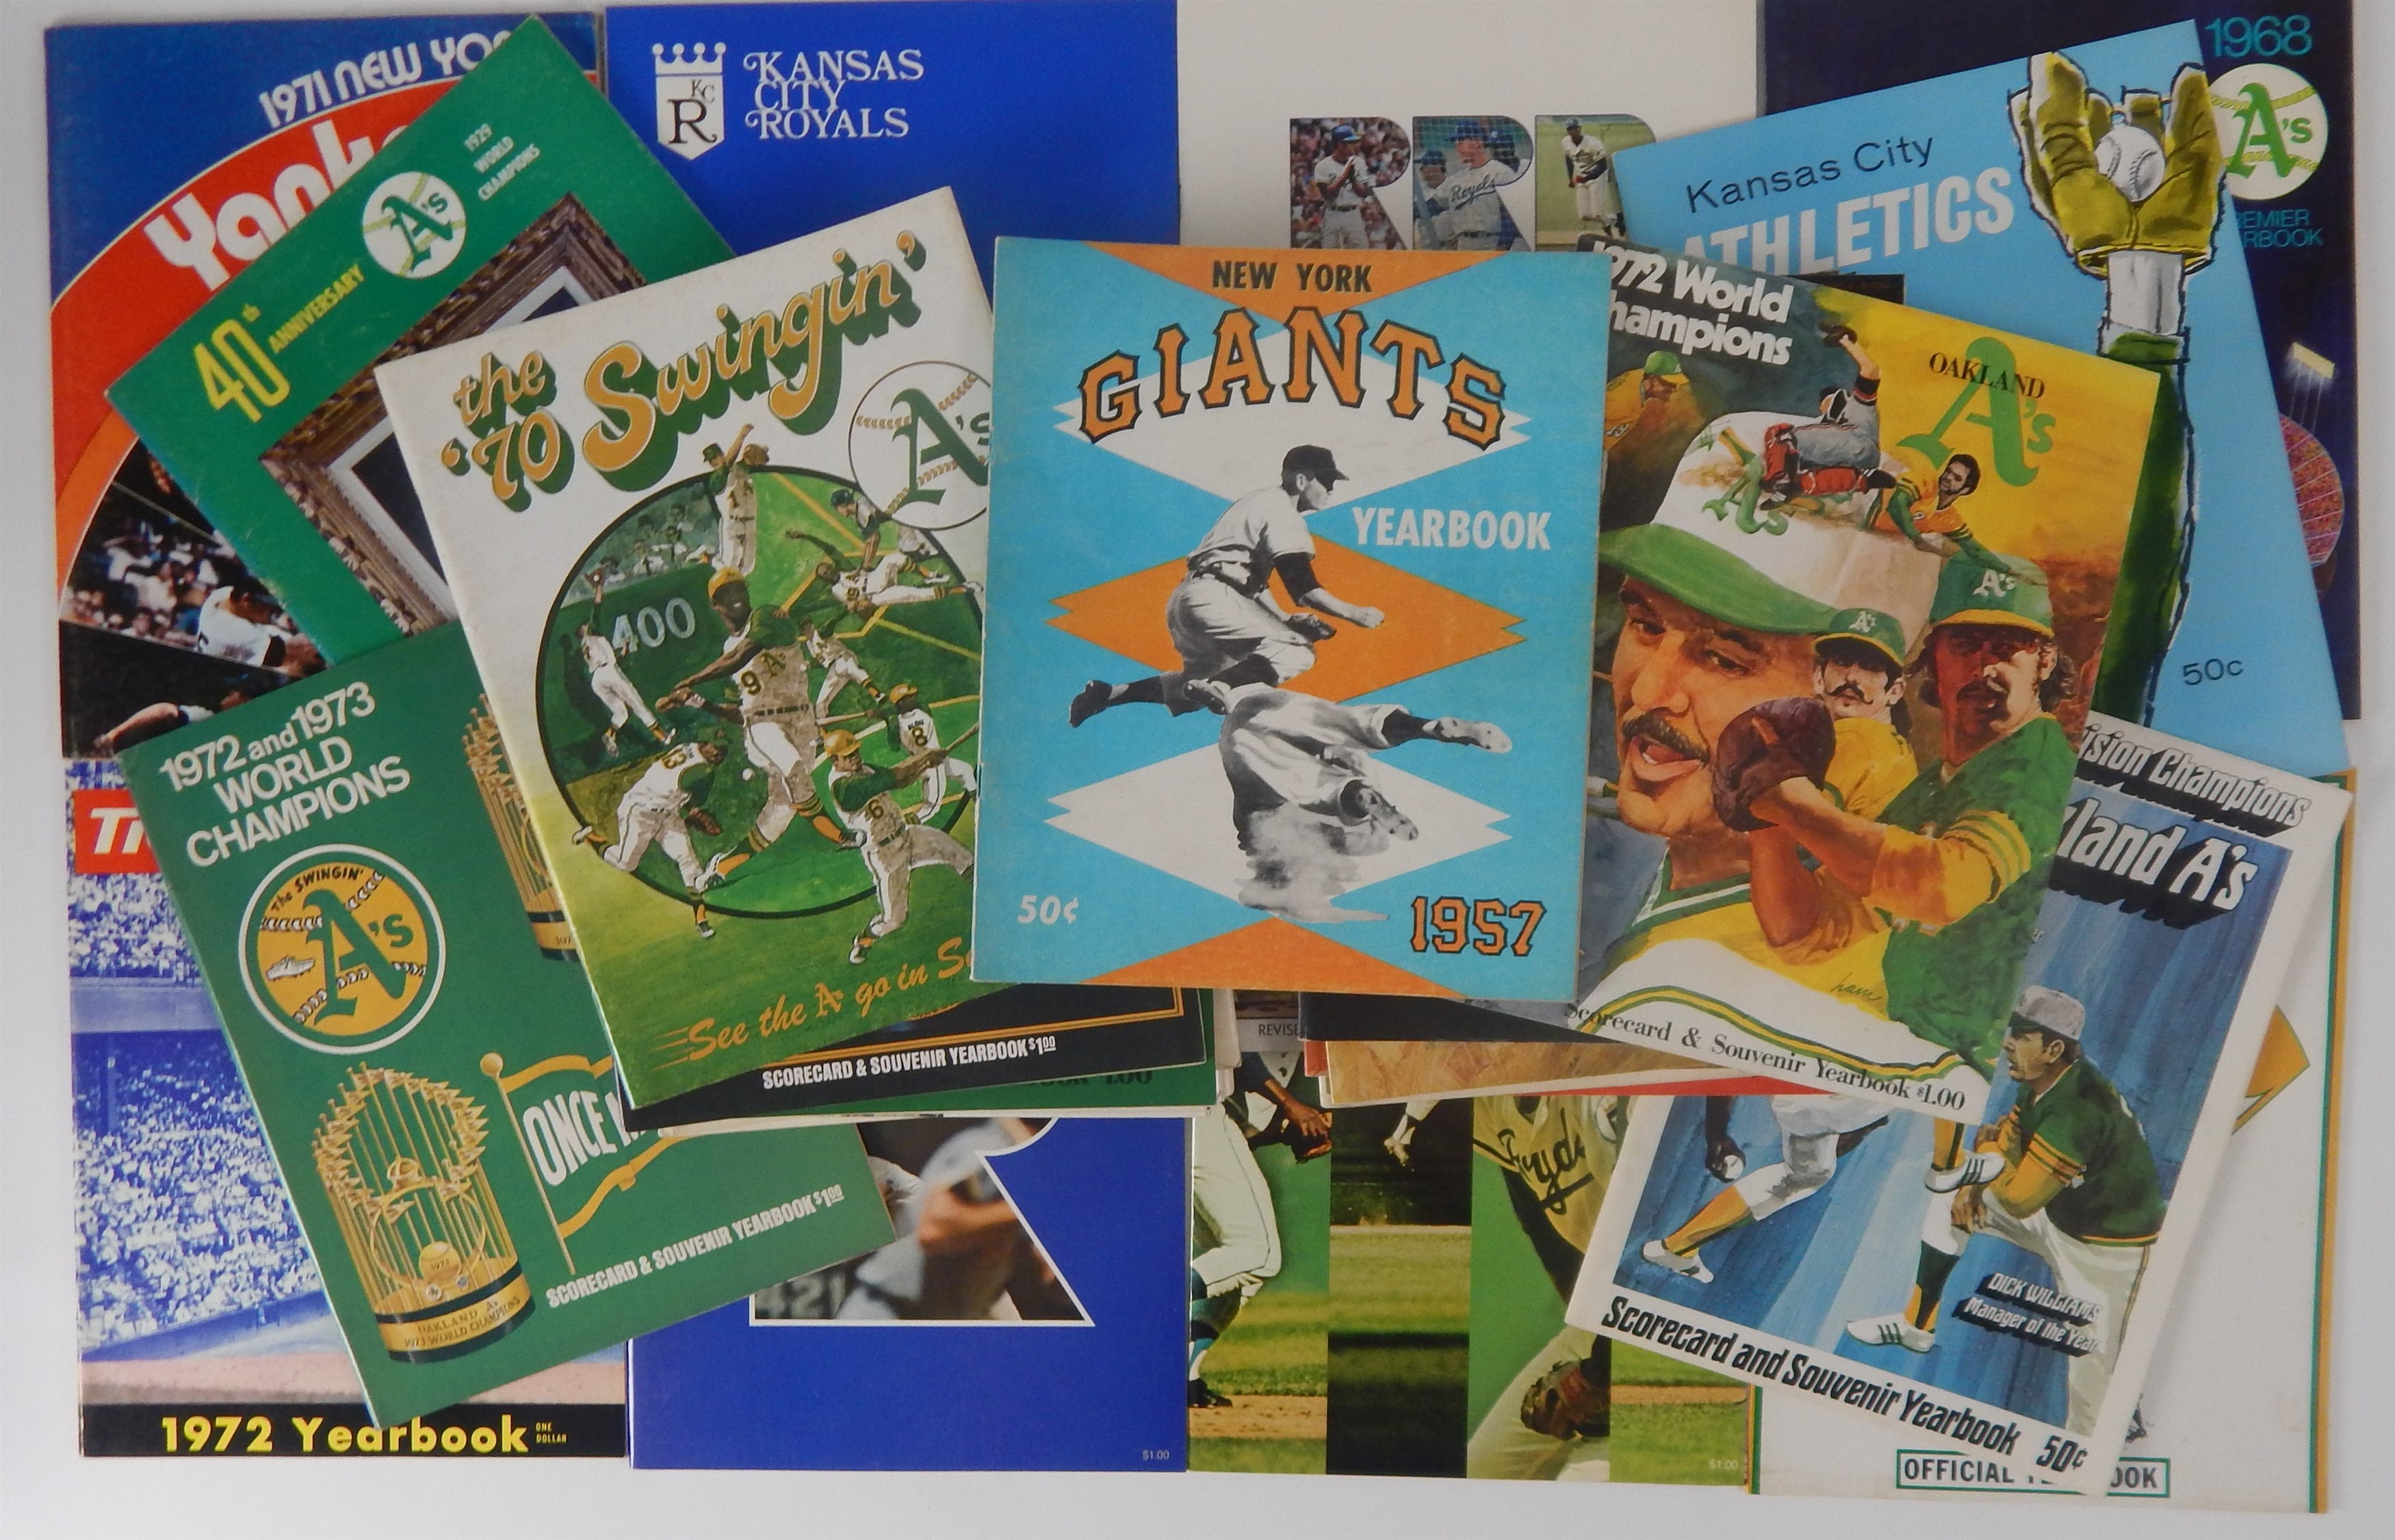 Baseball Publications - 1957-1991 Baseball Yearbook Collection (35)